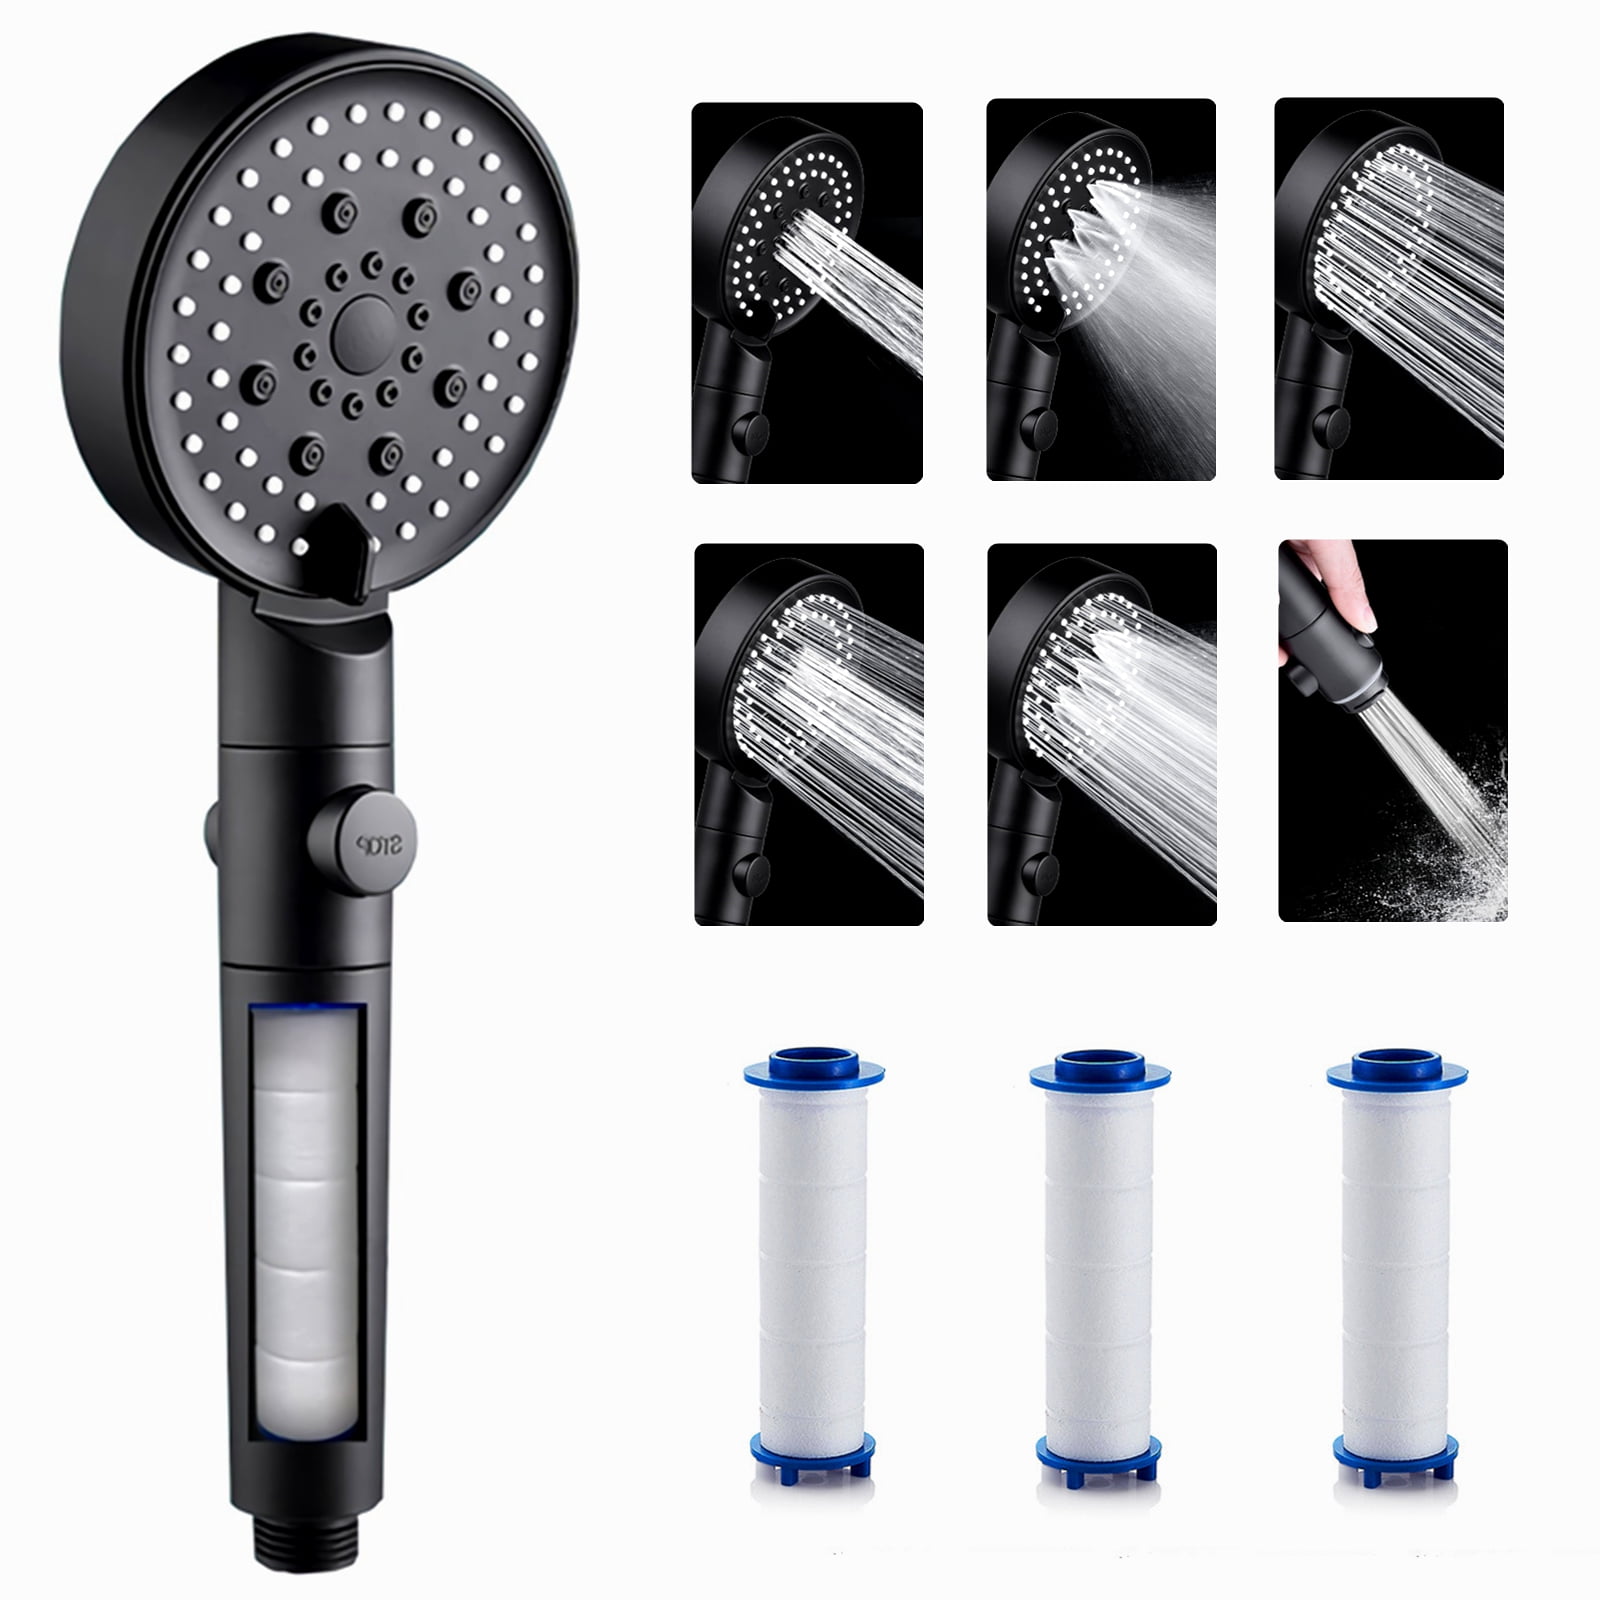 Details about   Anion SPA Filtration Shower Head Bathroom Water Saving Filter Handheld Nozzle 